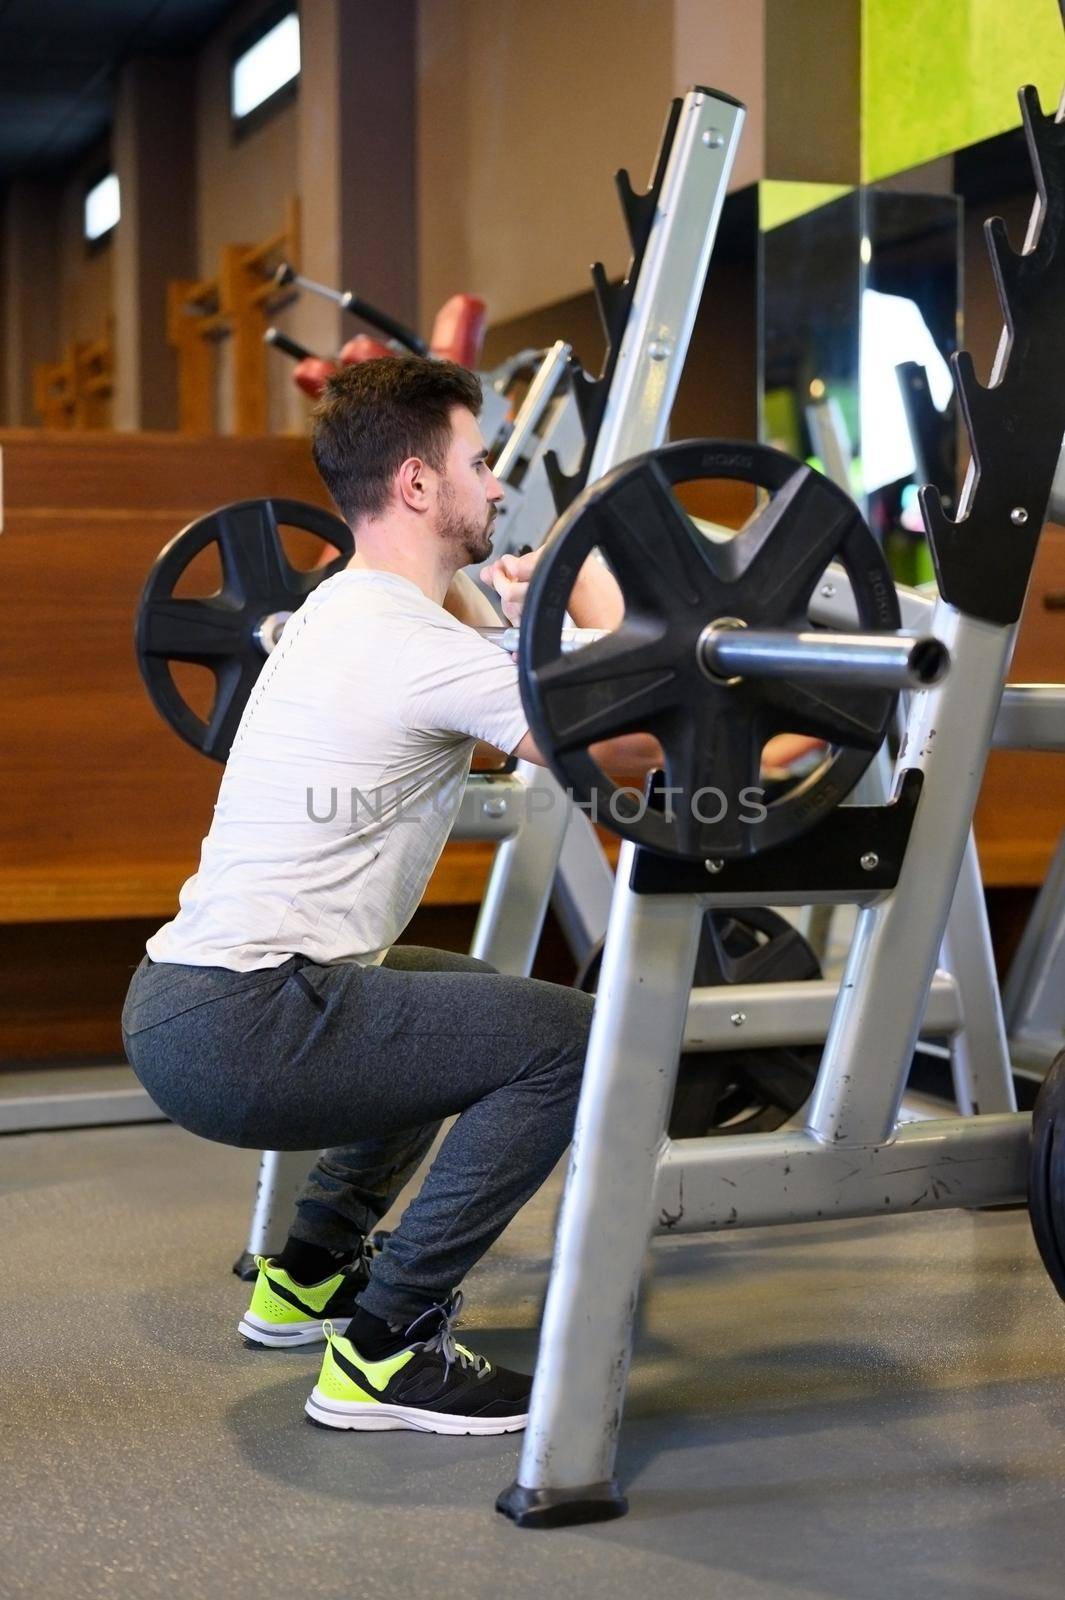 Fit man Squats With Barbell Back In Front Of Mirror Inside Gym. High quality photo.